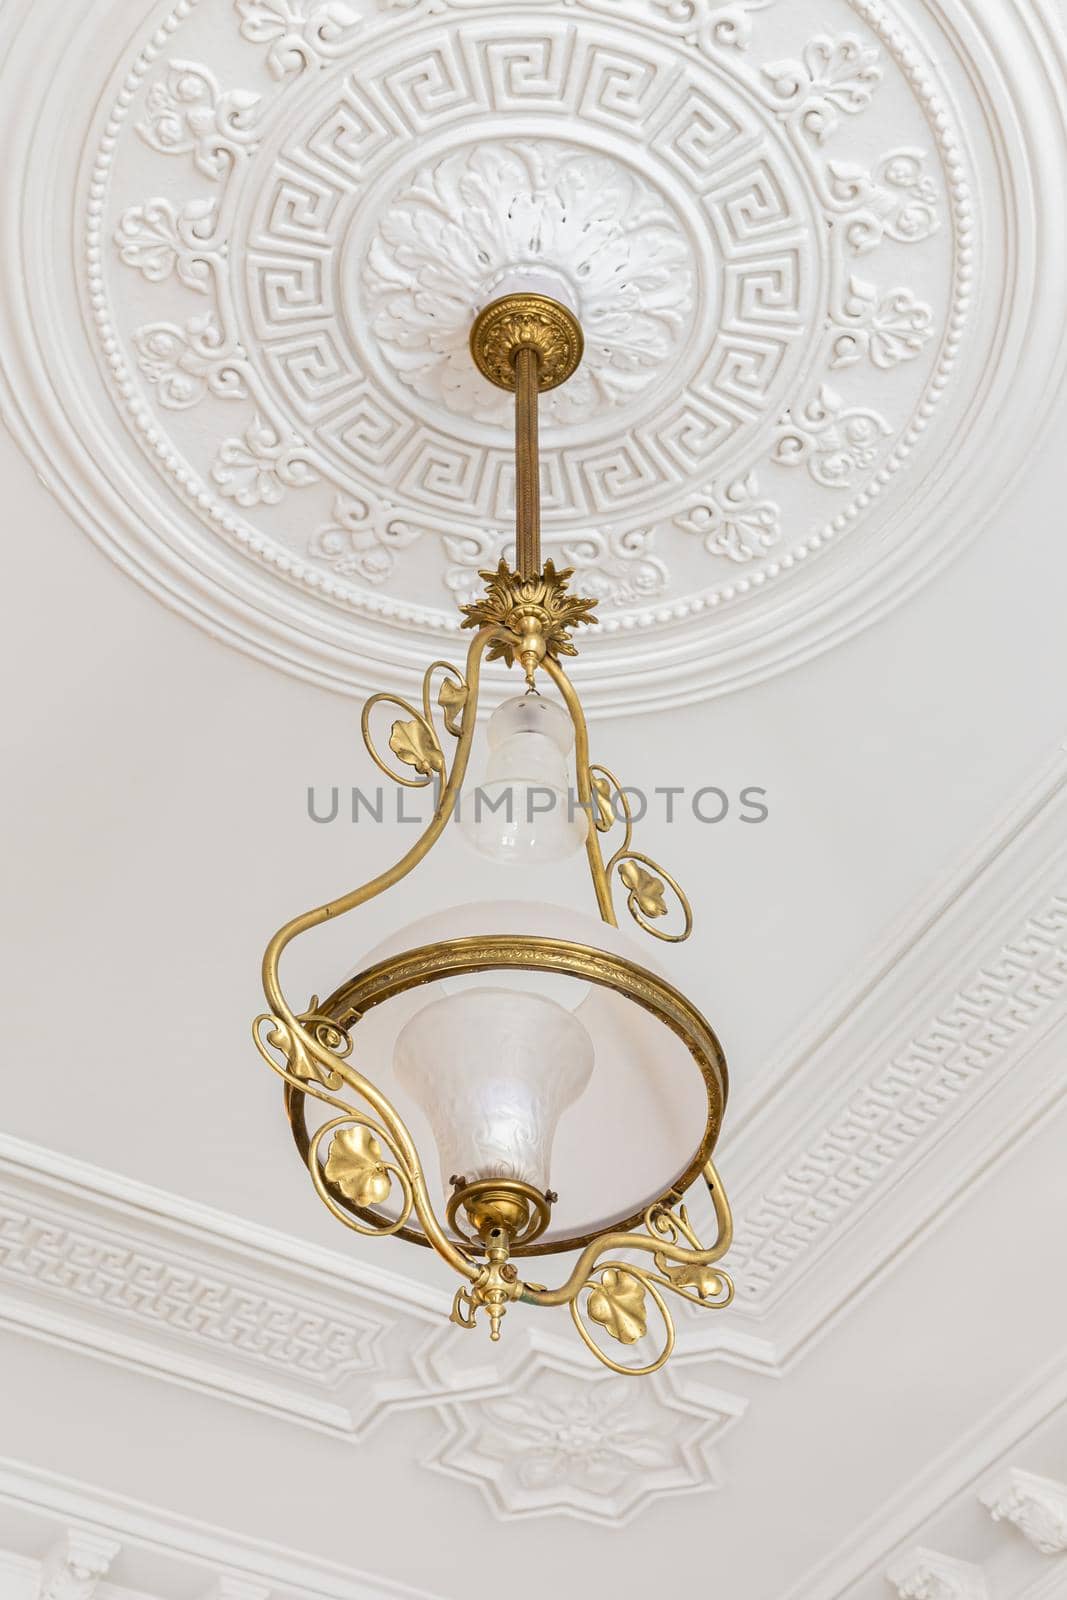 Vintage chandelier in the interior of white room with stucco molding on the ceiling.